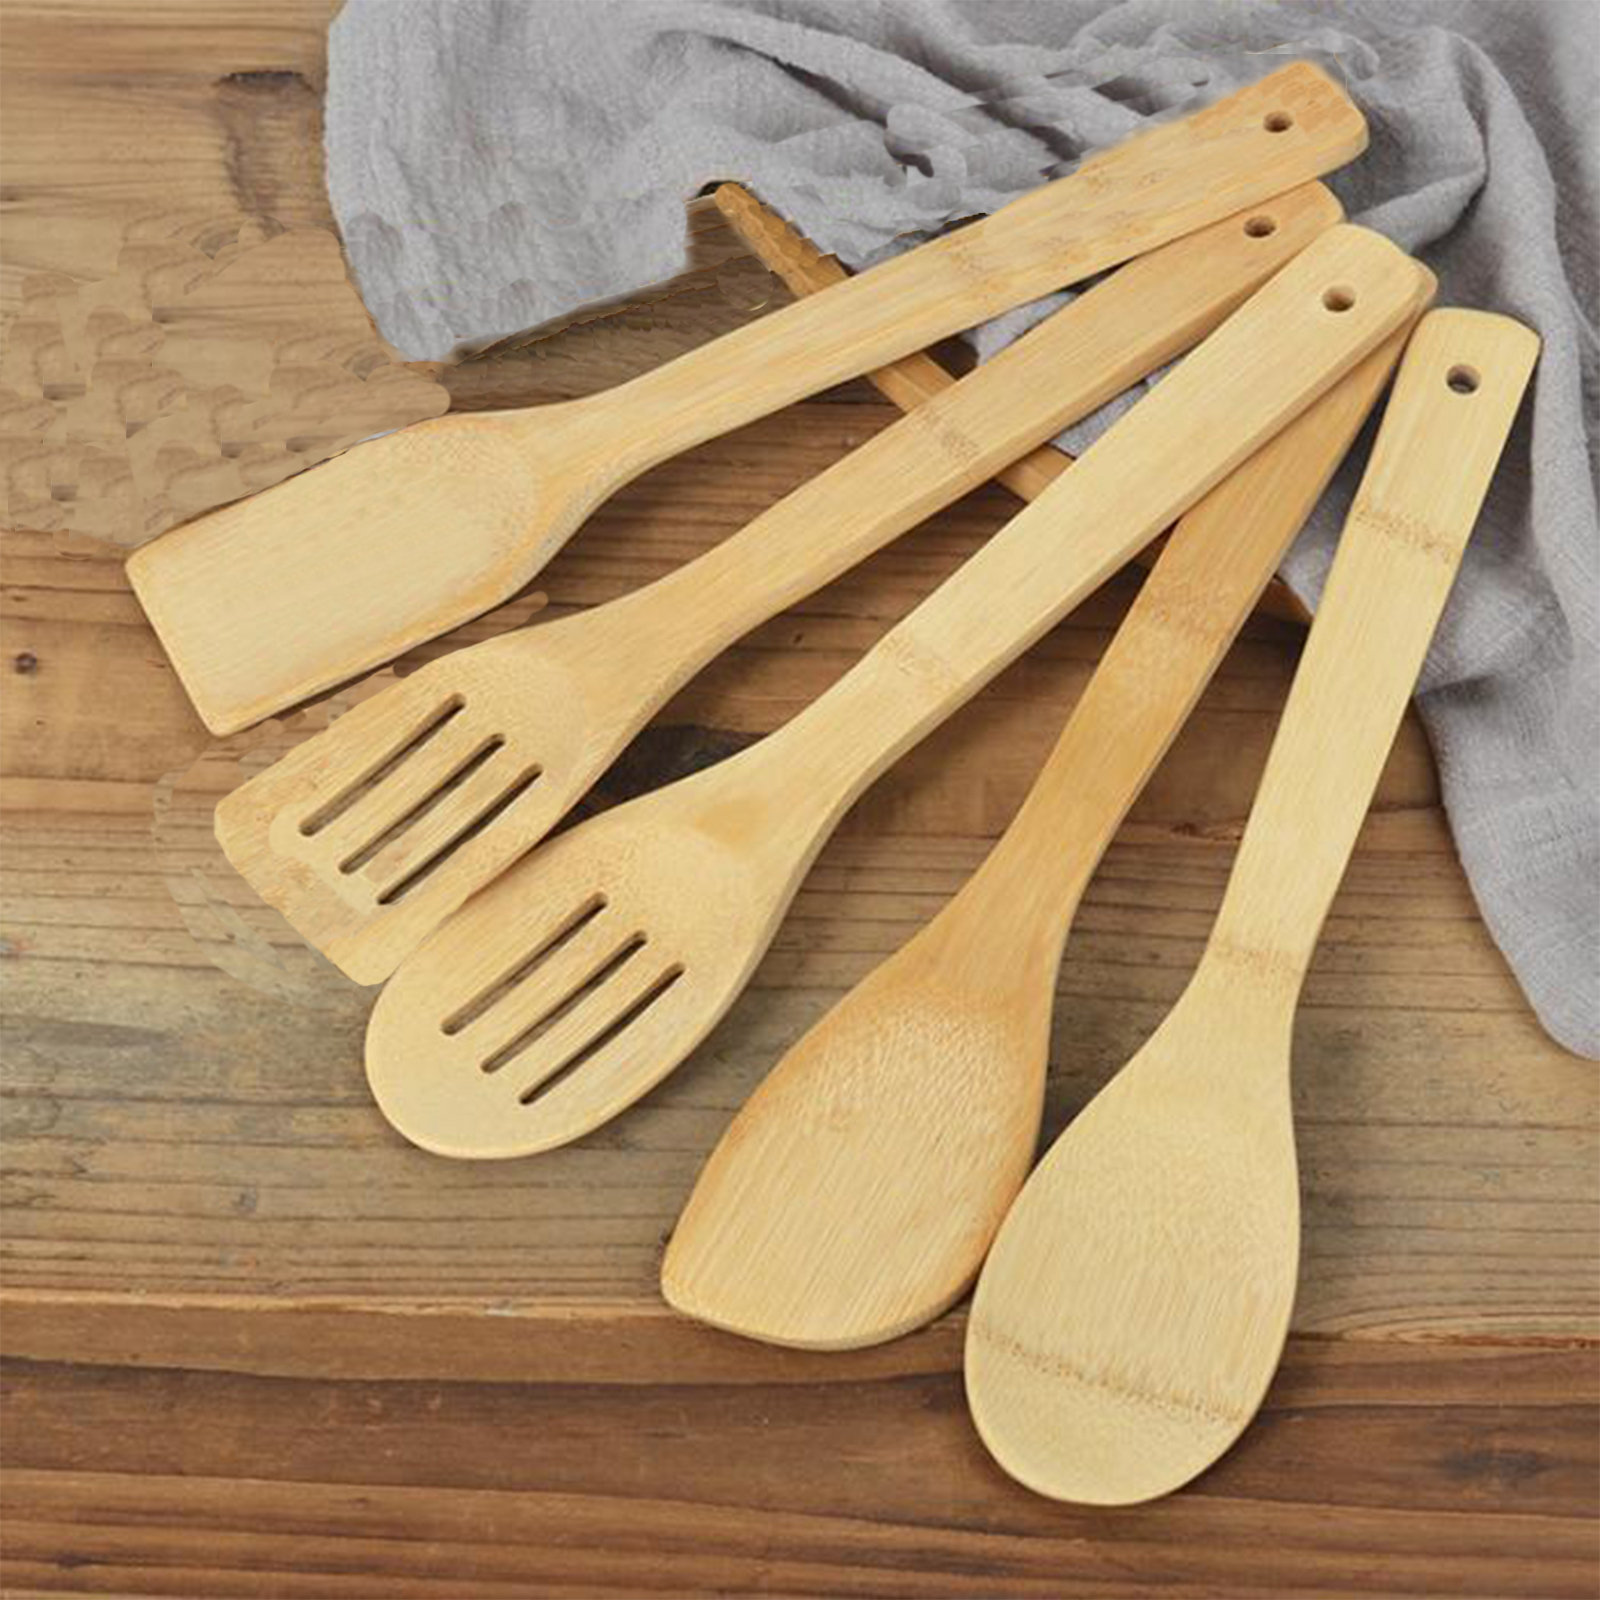 Five Simply Smart Tidy 3-Compartment High Quality Space Saving Storage  Bamboo Cutlery Tray Brown, FIVE SIMPLY SMART, All Brands